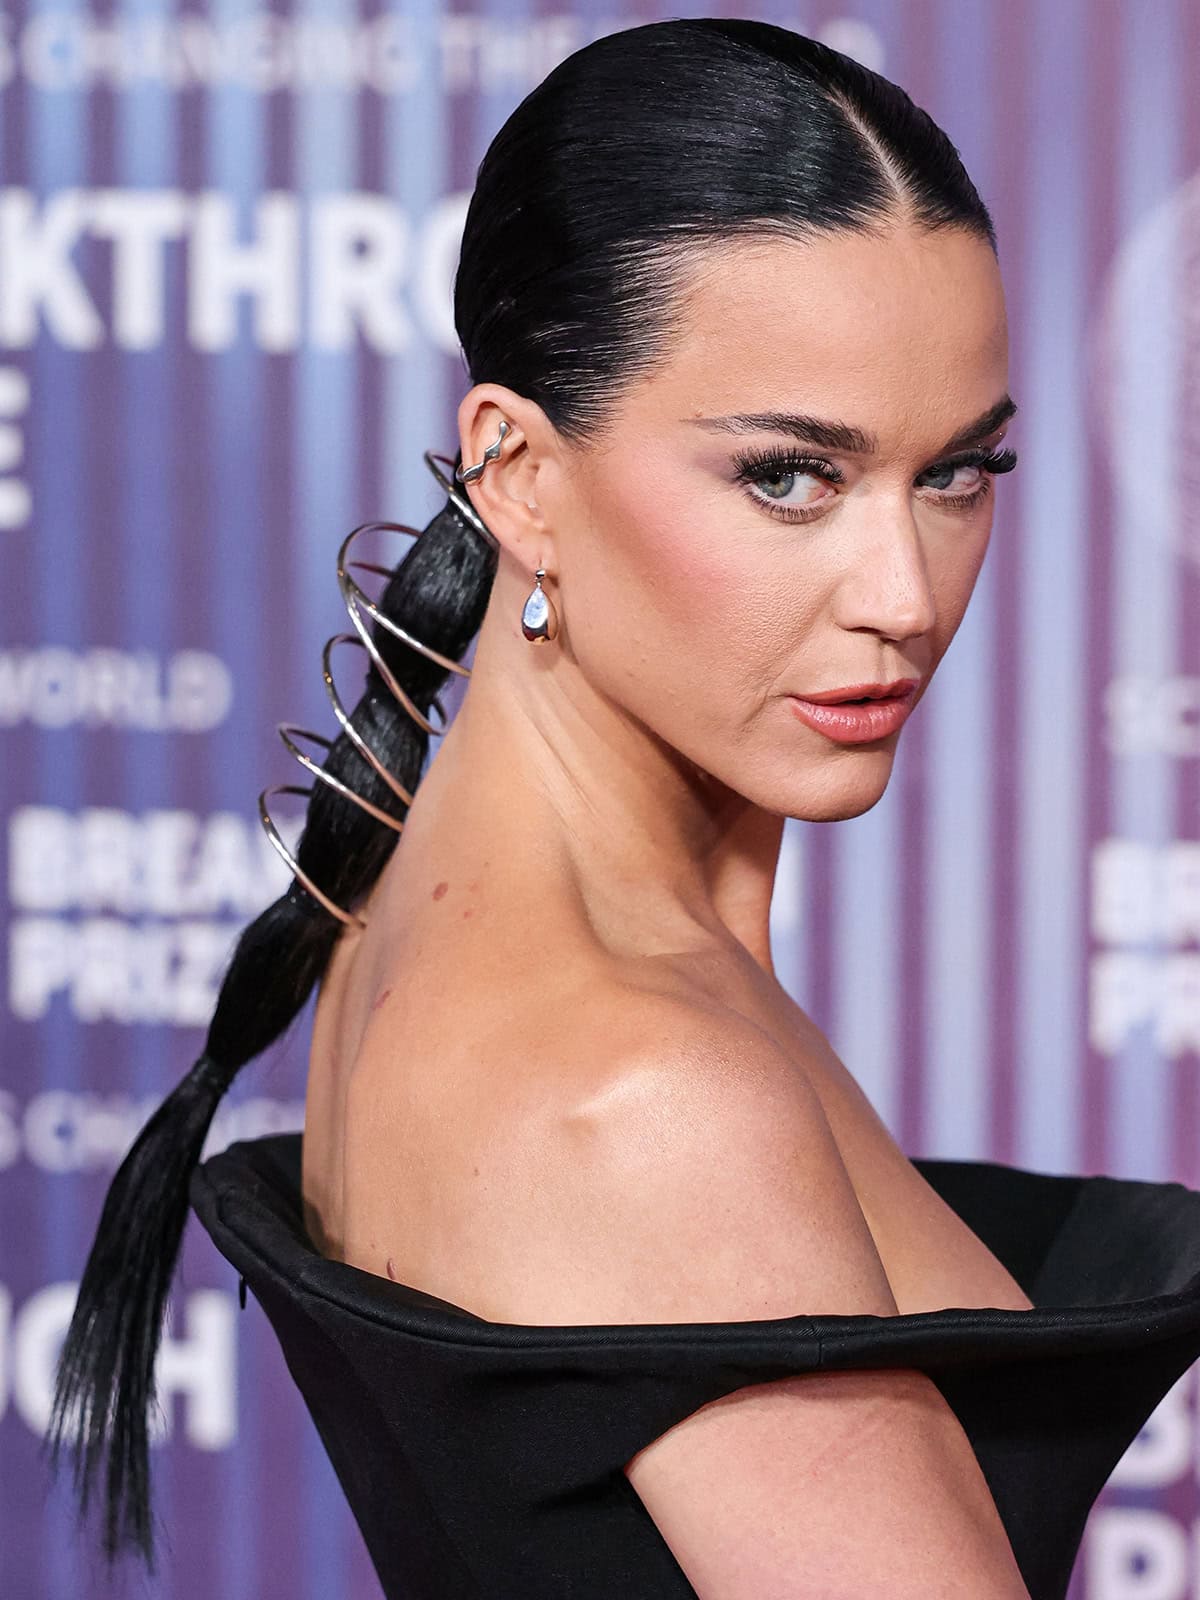 Katy Perry continues with the space-age theme of her ensemble by styling her sleek ponytail with silver ring hair jewelry by Kurumi and wearing silver earrings by Mara Paris